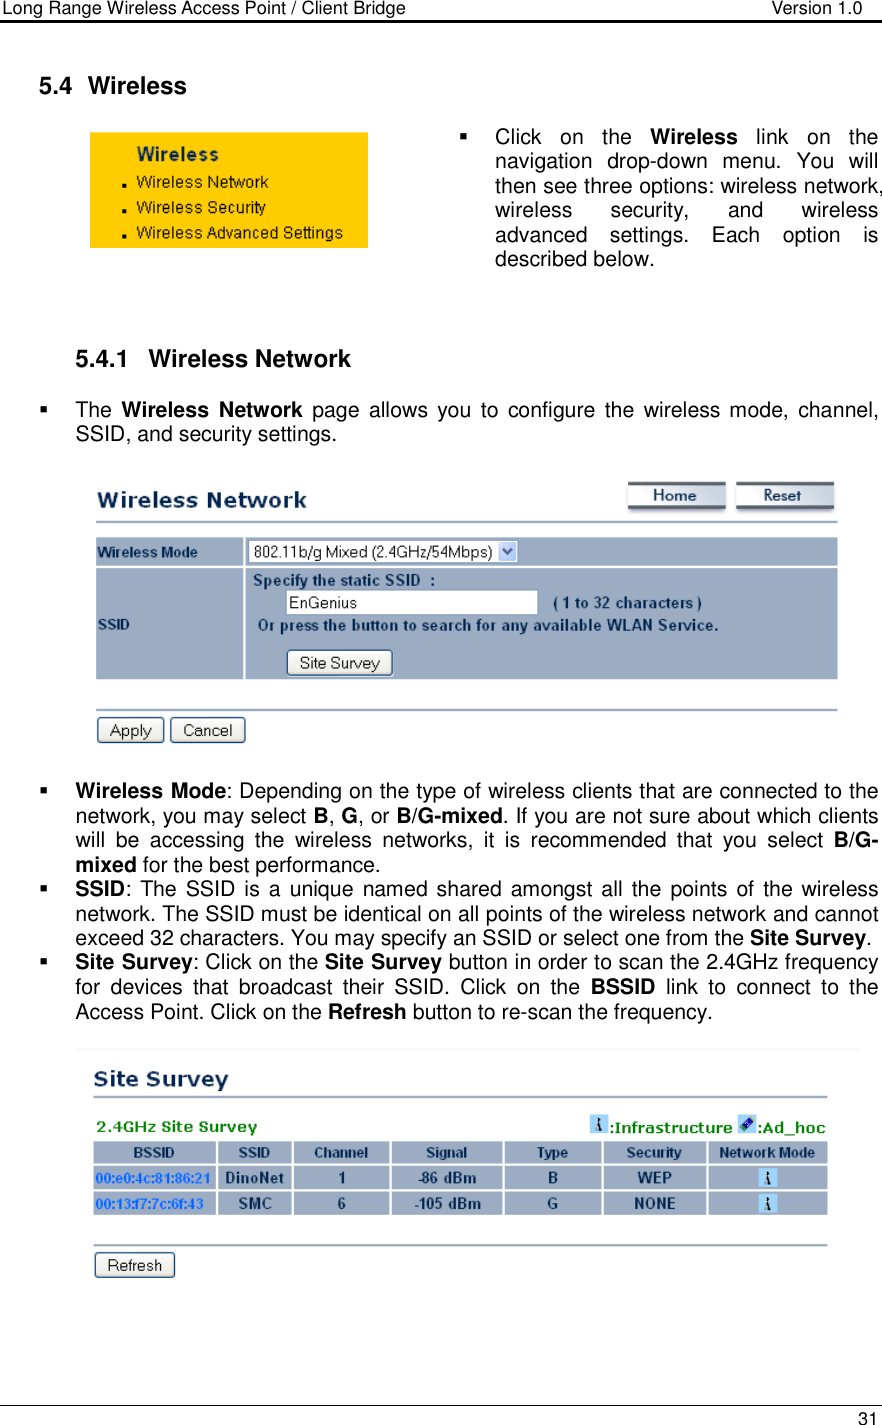 Long Range Wireless Access Point / Client Bridge                                   Version 1.0    31   5.4   Wireless   Click  on  the  Wireless  link  on  the navigation  drop-down  menu.  You  will then see three options: wireless network, wireless  security,  and  wireless advanced  settings.  Each  option  is described below.     5.4.1  Wireless Network   The Wireless  Network  page  allows  you  to  configure  the  wireless mode,  channel, SSID, and security settings.      Wireless Mode: Depending on the type of wireless clients that are connected to the network, you may select B, G, or B/G-mixed. If you are not sure about which clients will  be  accessing  the  wireless  networks,  it  is  recommended  that  you  select  B/G-mixed for the best performance.    SSID: The  SSID is a unique named shared  amongst all the points  of the wireless network. The SSID must be identical on all points of the wireless network and cannot exceed 32 characters. You may specify an SSID or select one from the Site Survey.  Site Survey: Click on the Site Survey button in order to scan the 2.4GHz frequency for  devices  that  broadcast  their  SSID.  Click  on  the  BSSID  link  to  connect  to  the Access Point. Click on the Refresh button to re-scan the frequency.       